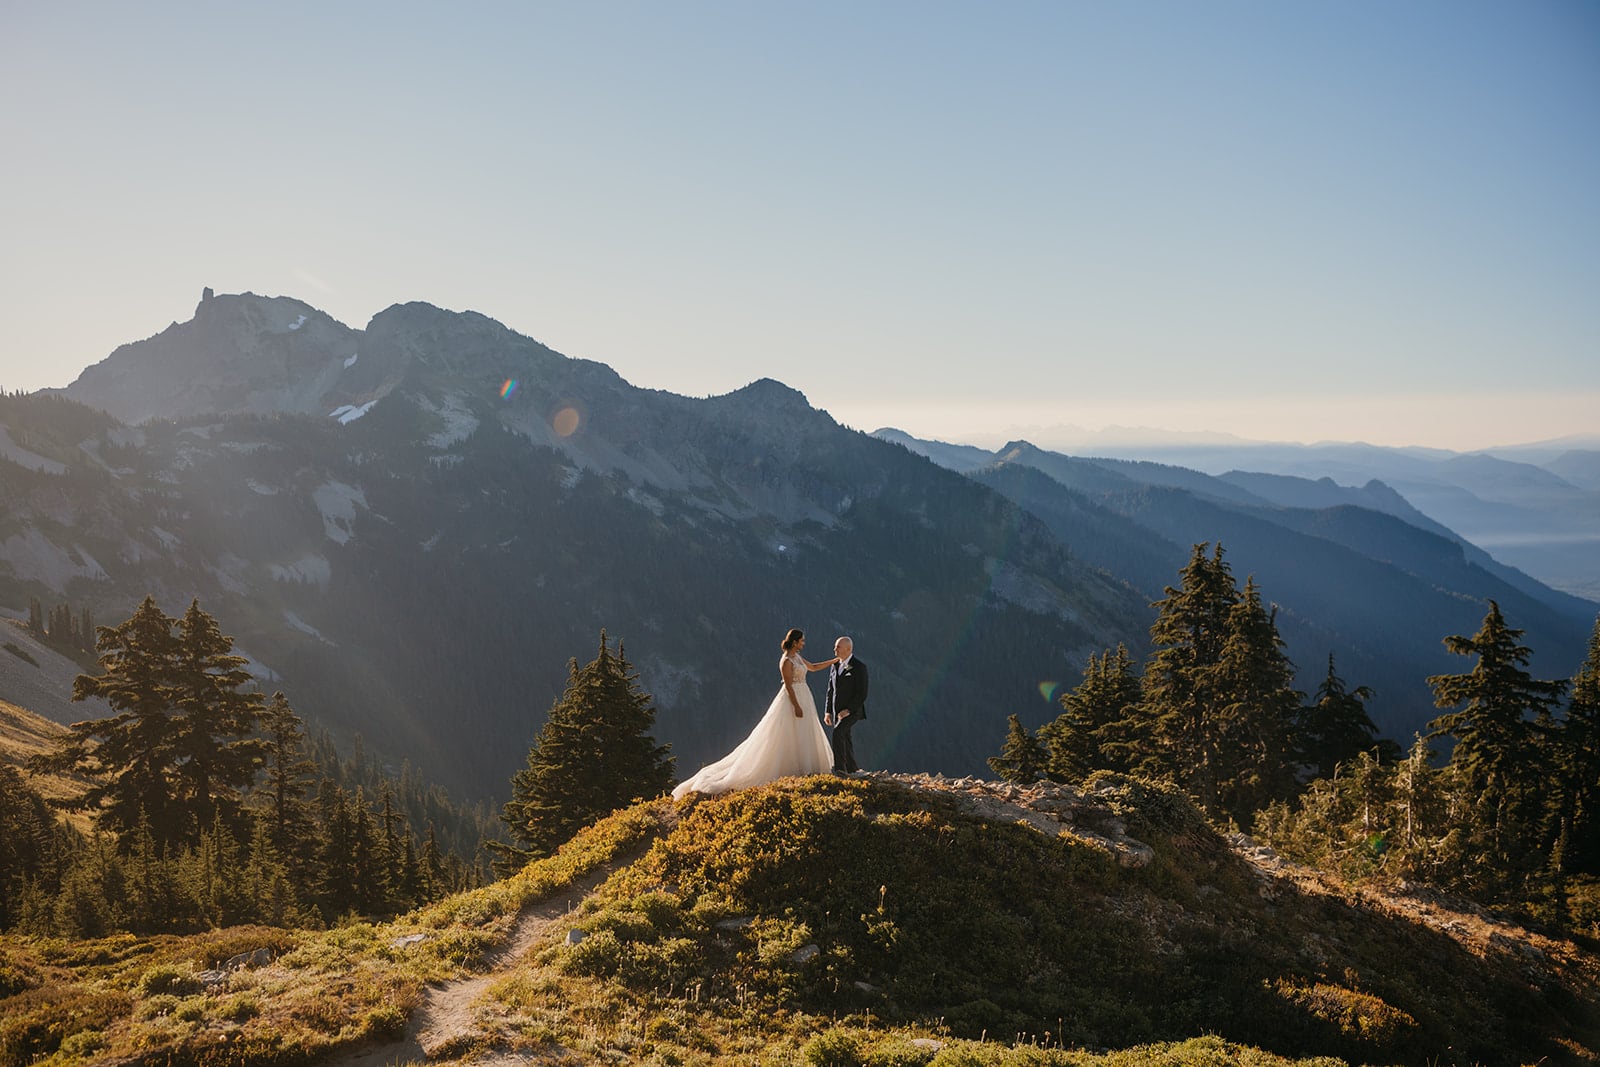 A couple stands together surrounded by mountains on their wedding day in Packwood, WA.